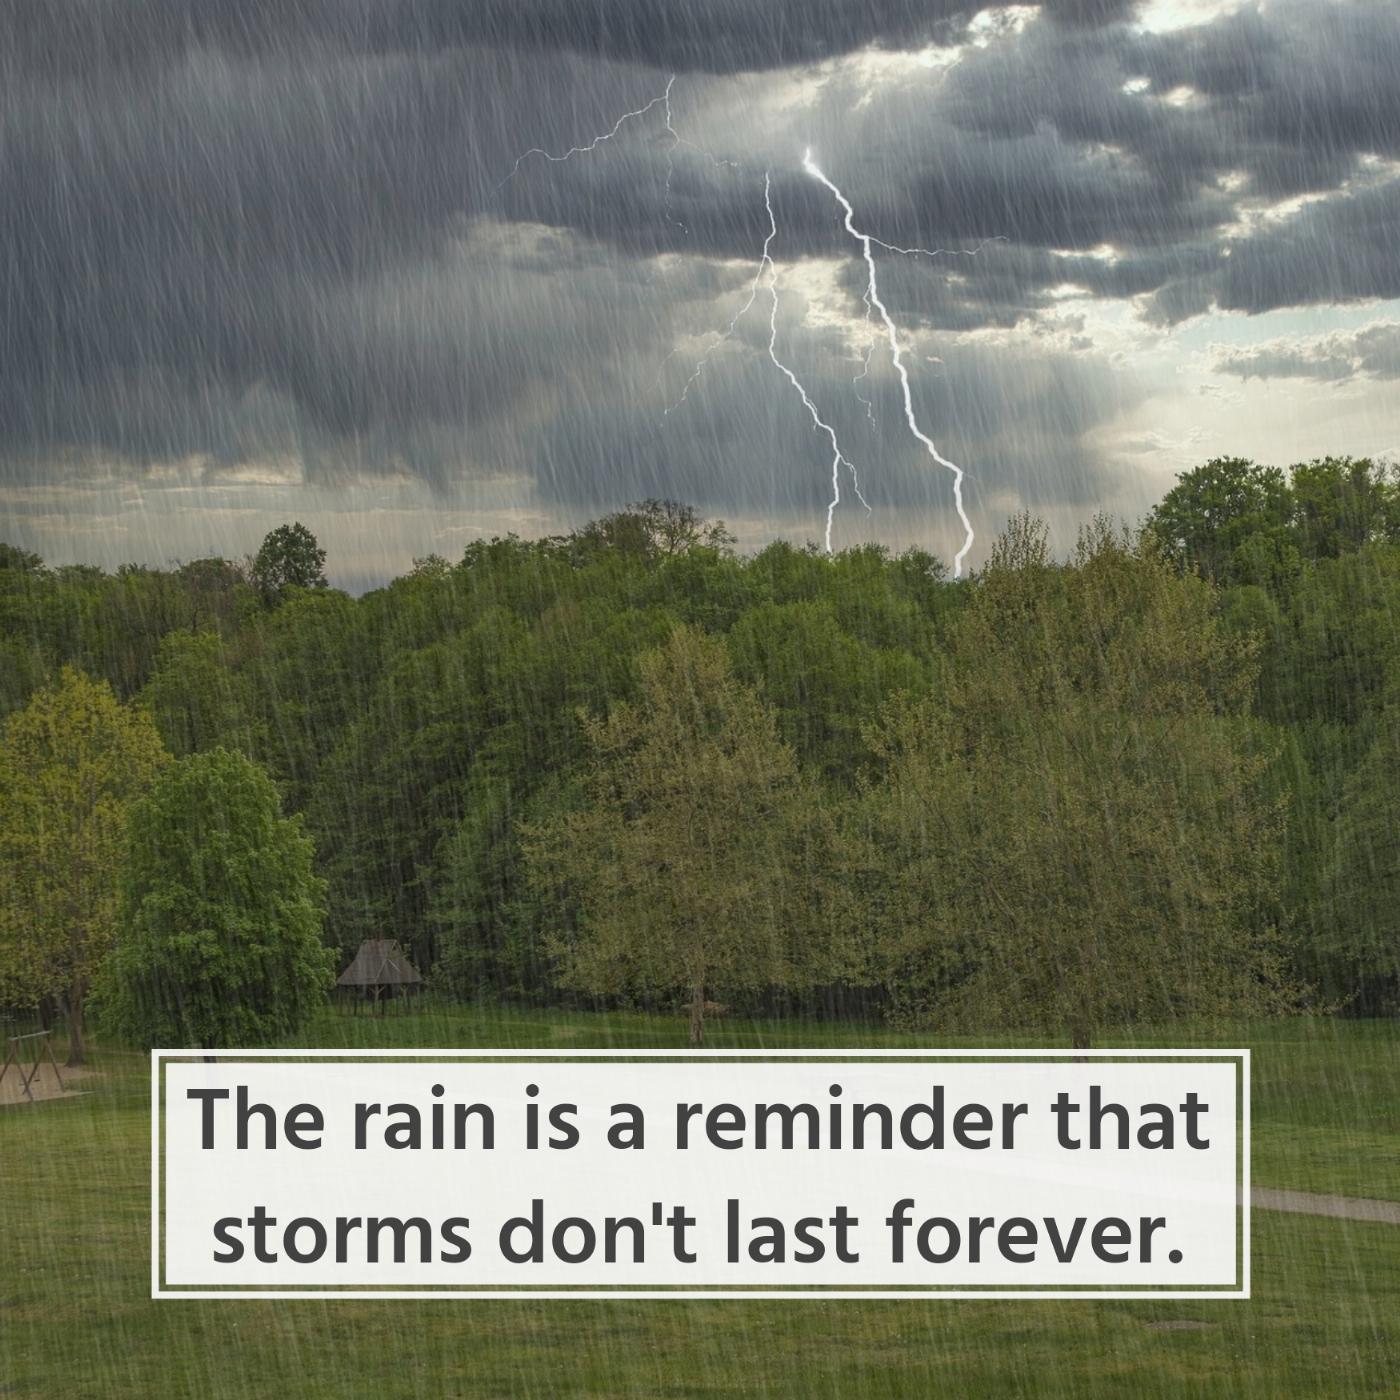 The rain is a reminder that storms don't last forever